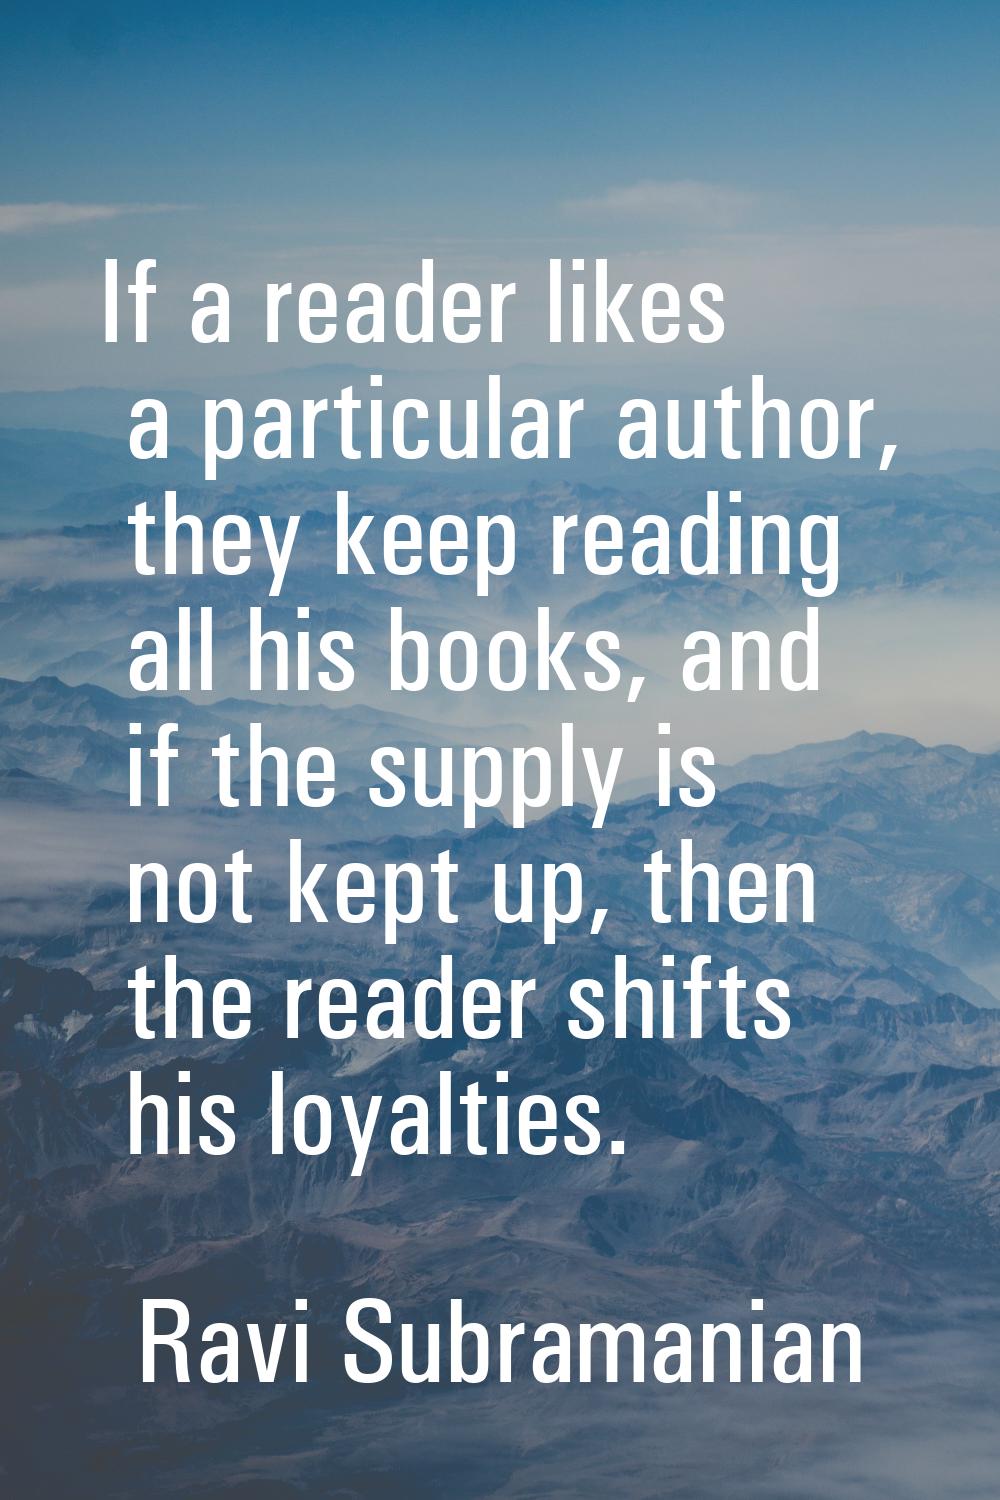 If a reader likes a particular author, they keep reading all his books, and if the supply is not ke